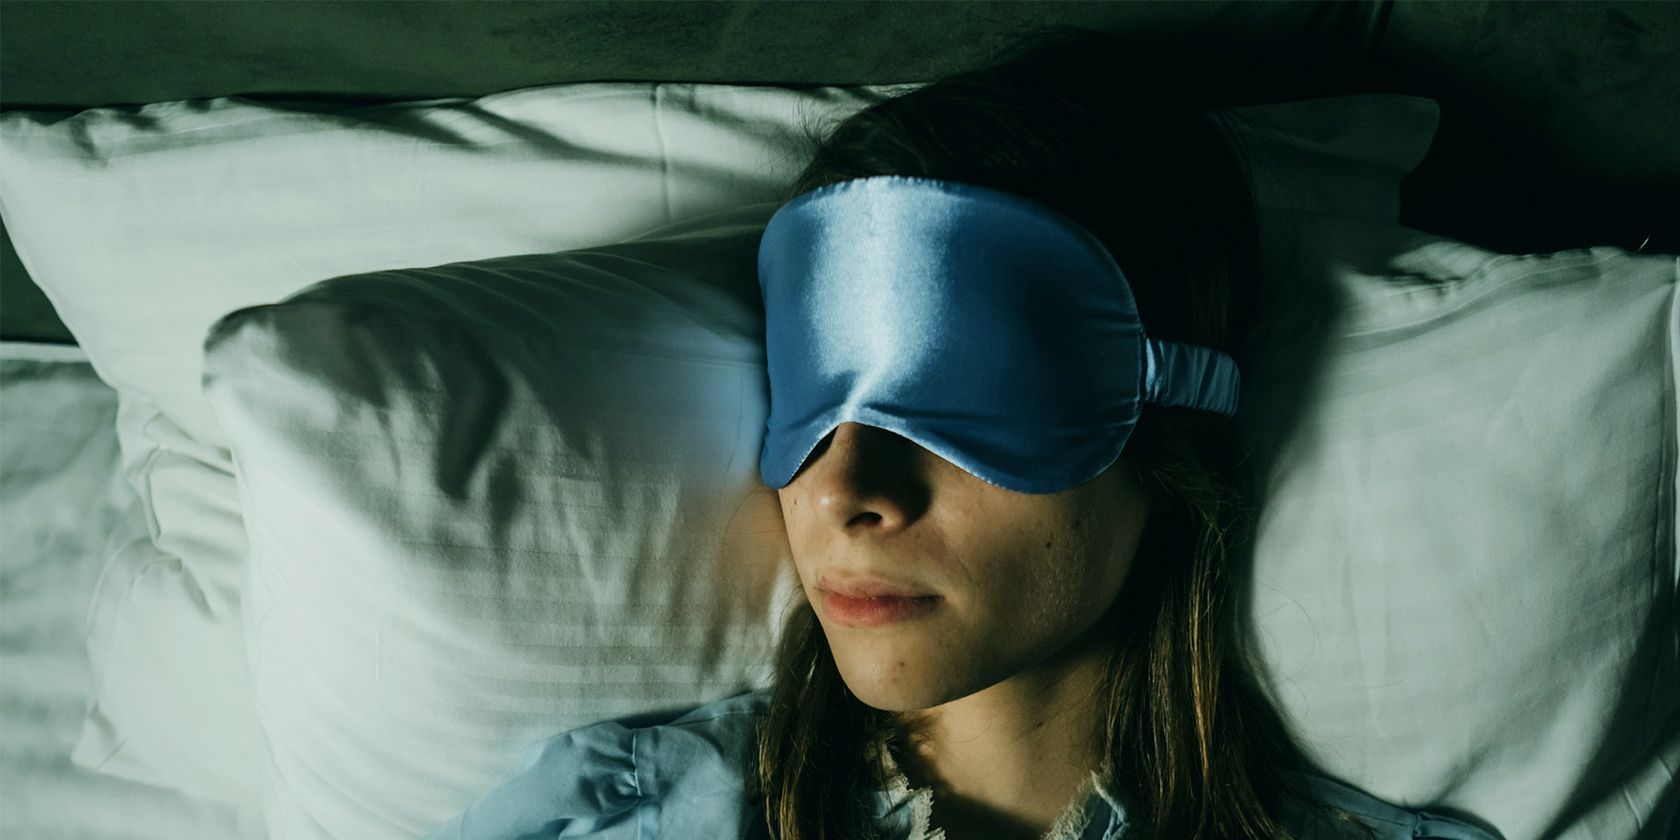 Should You Upgrade to a Smart Sleeping Mask?